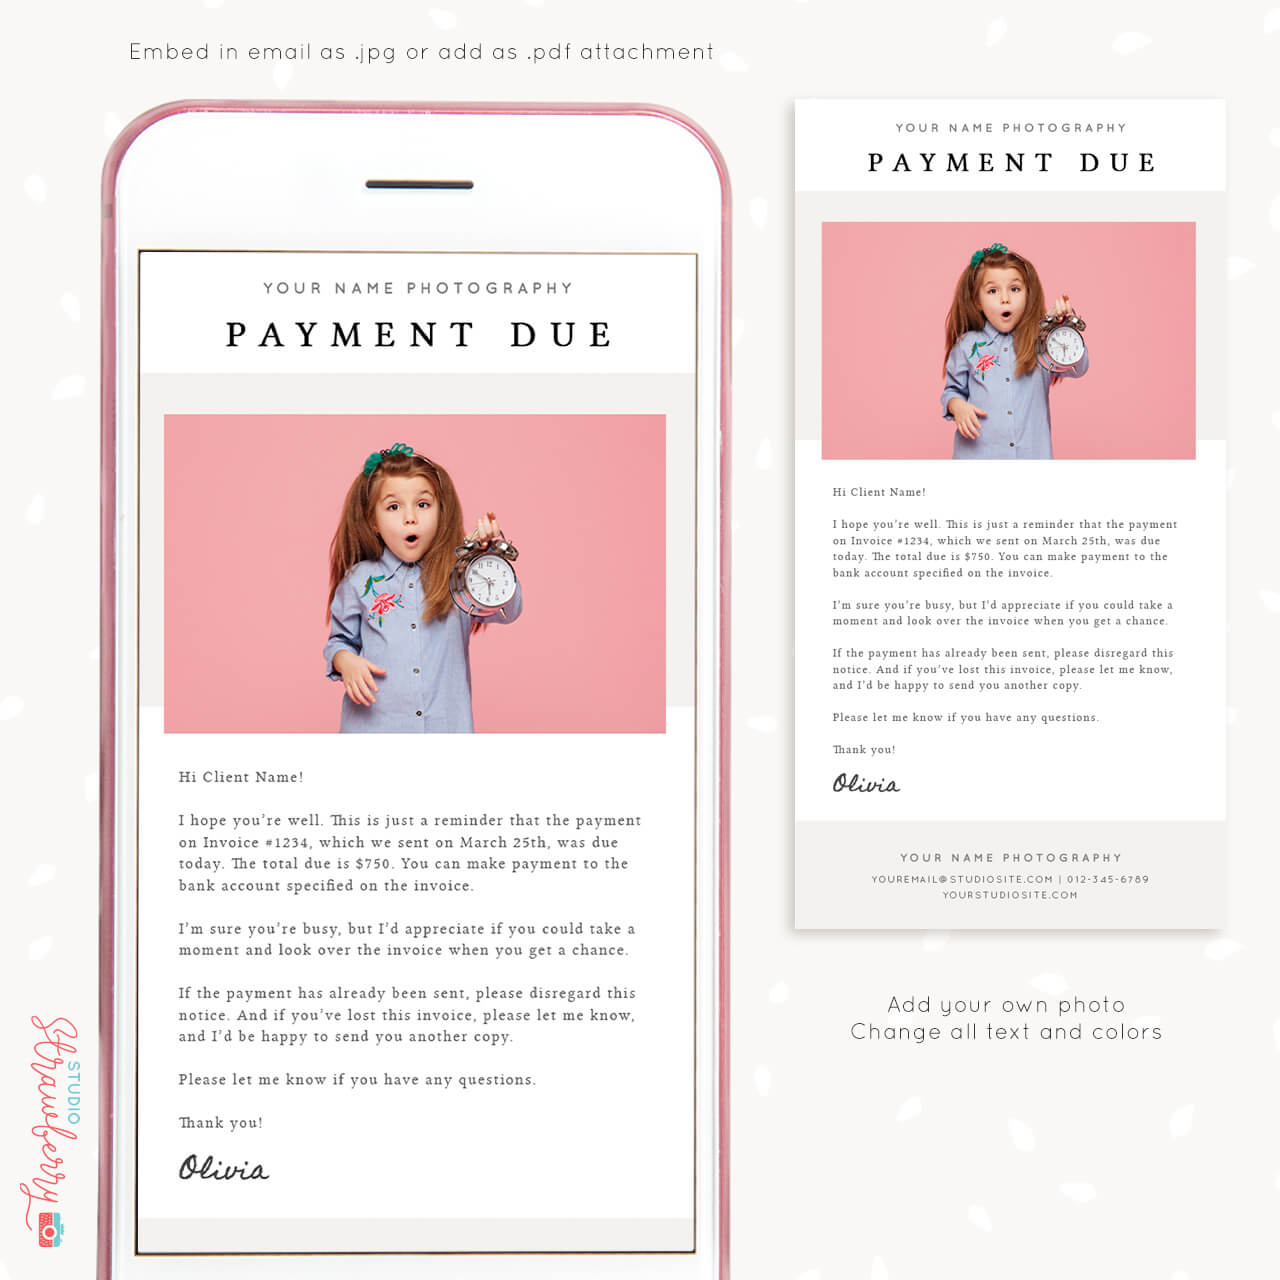 Payment reminder email template